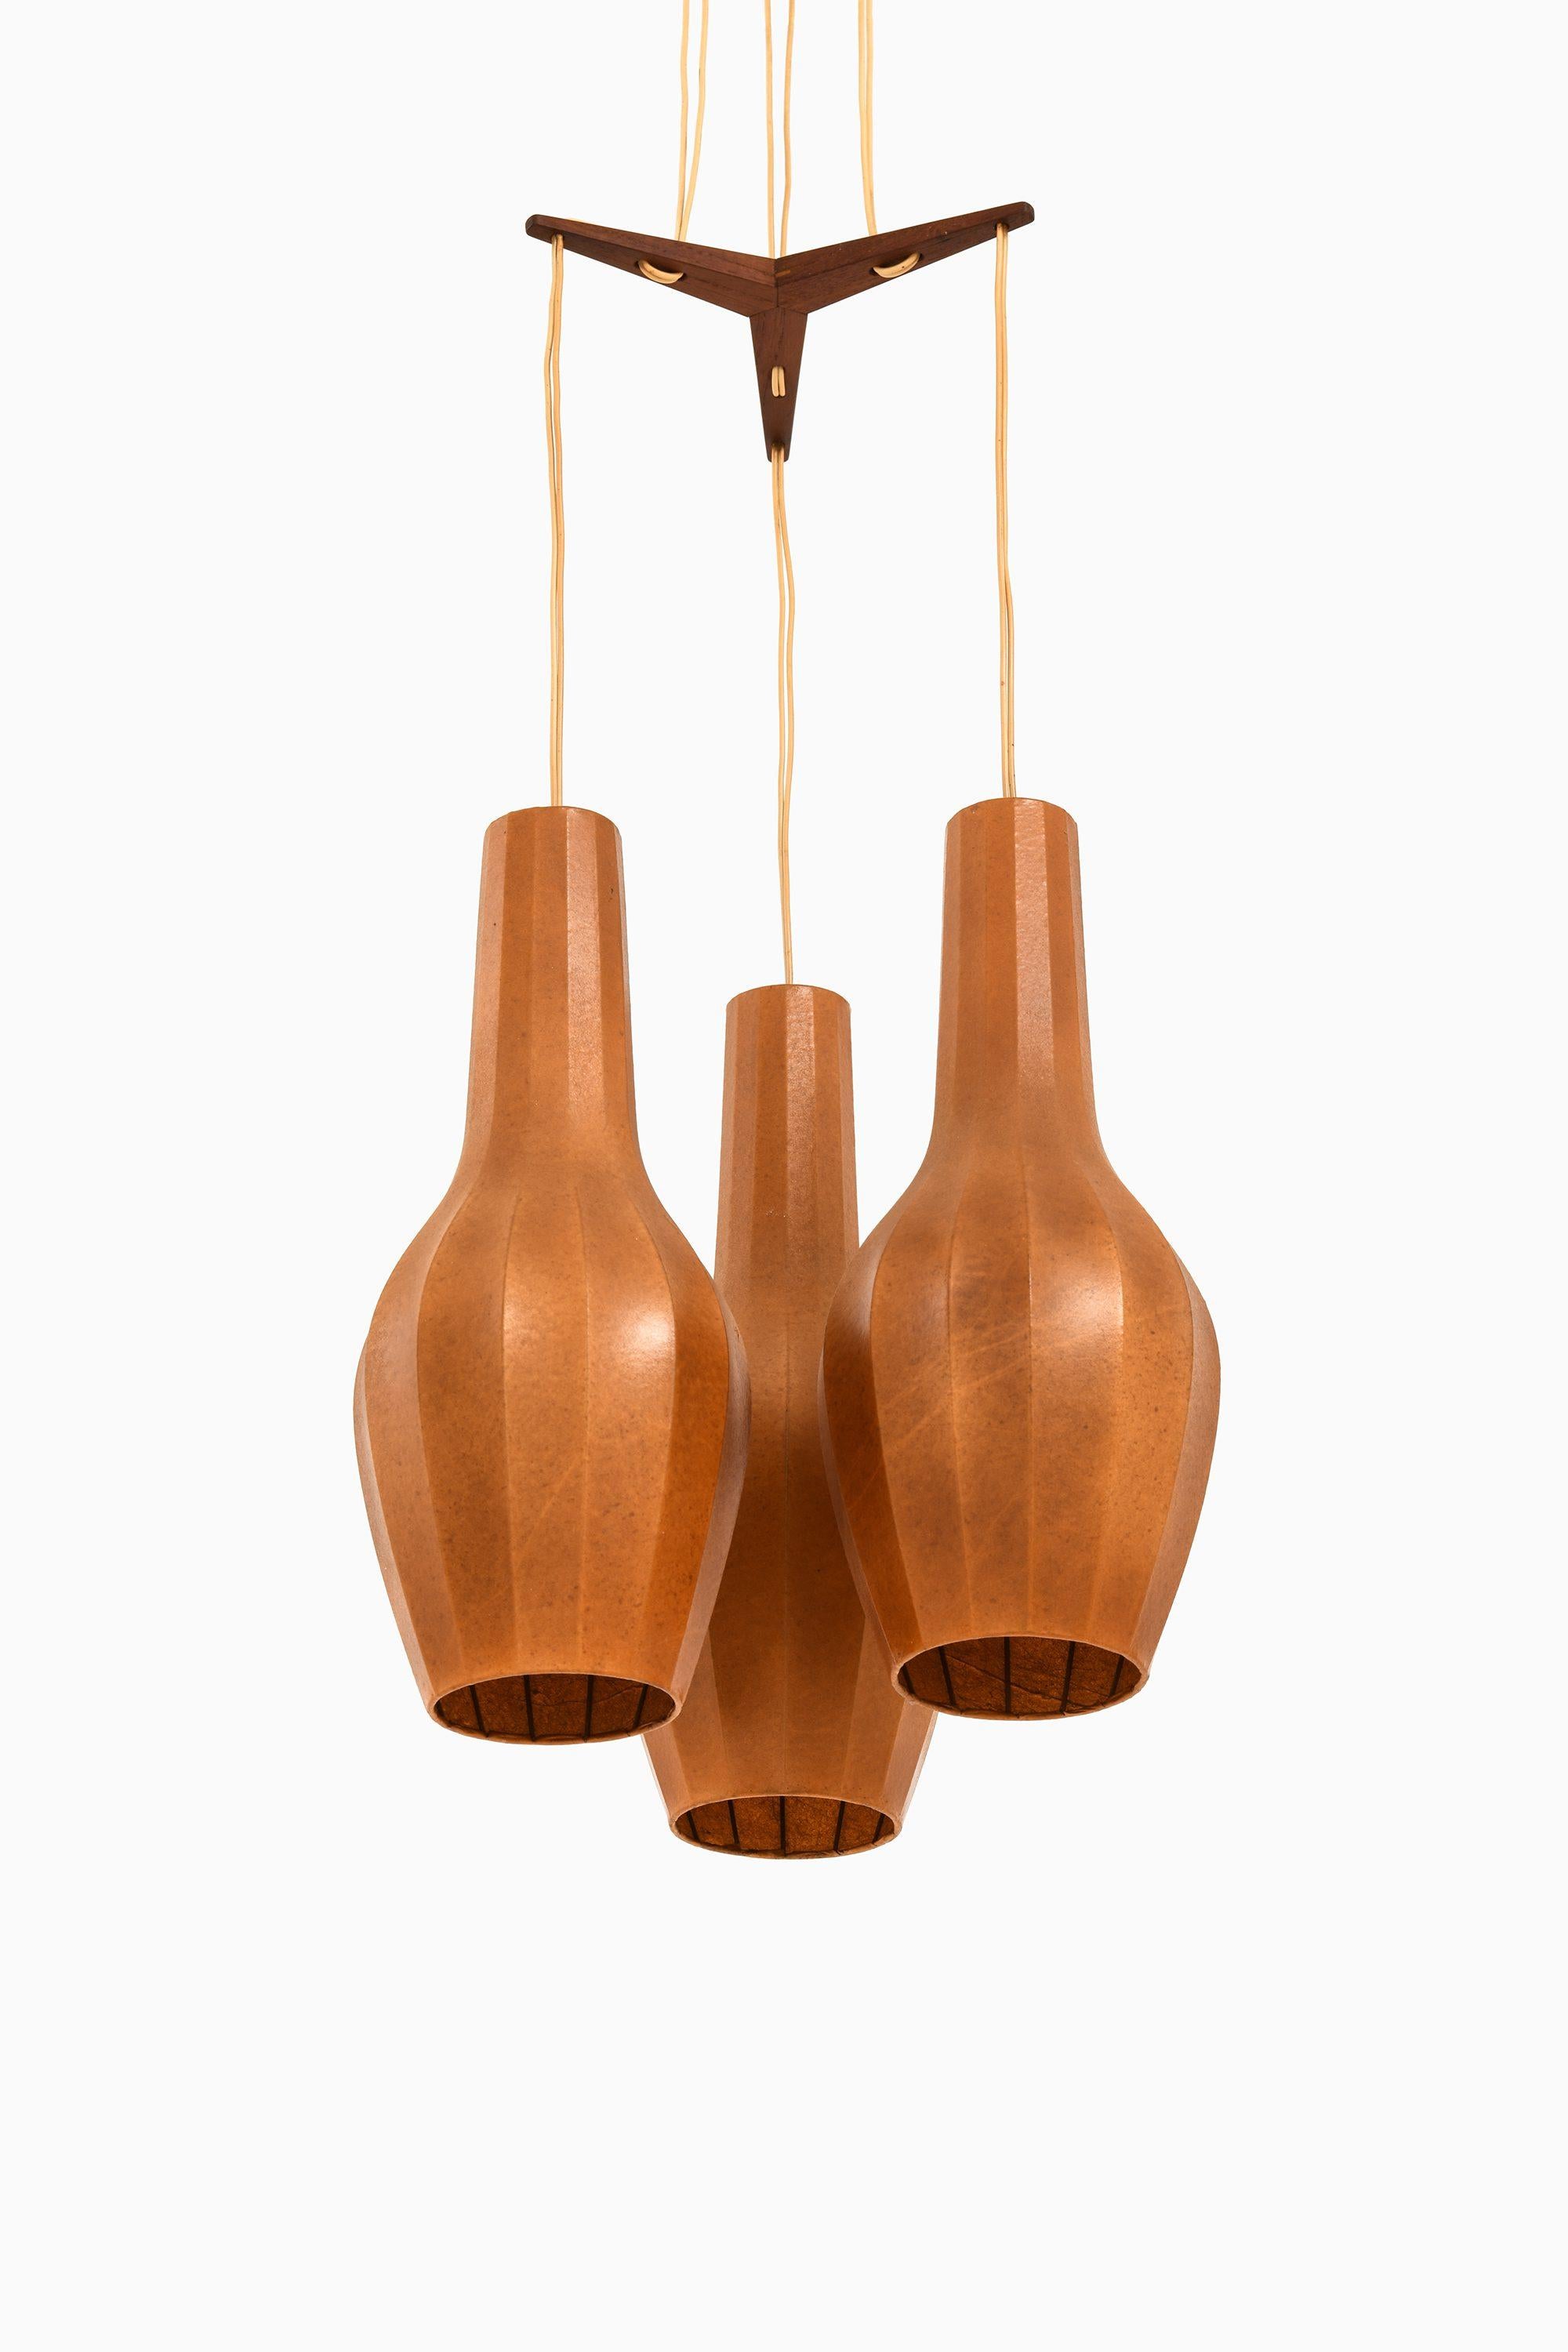 Ceiling Lamp in Teak and Original Lamp Shades by Hans Bergström, 1950's

Additional Information:
Material: Teak and original lamp shades
Style: Mid century, Scandinavian
Produced by Ateljé Lyktan in Åhus, Sweden
Dimensions (W x D x H): 32 x 32 x 145